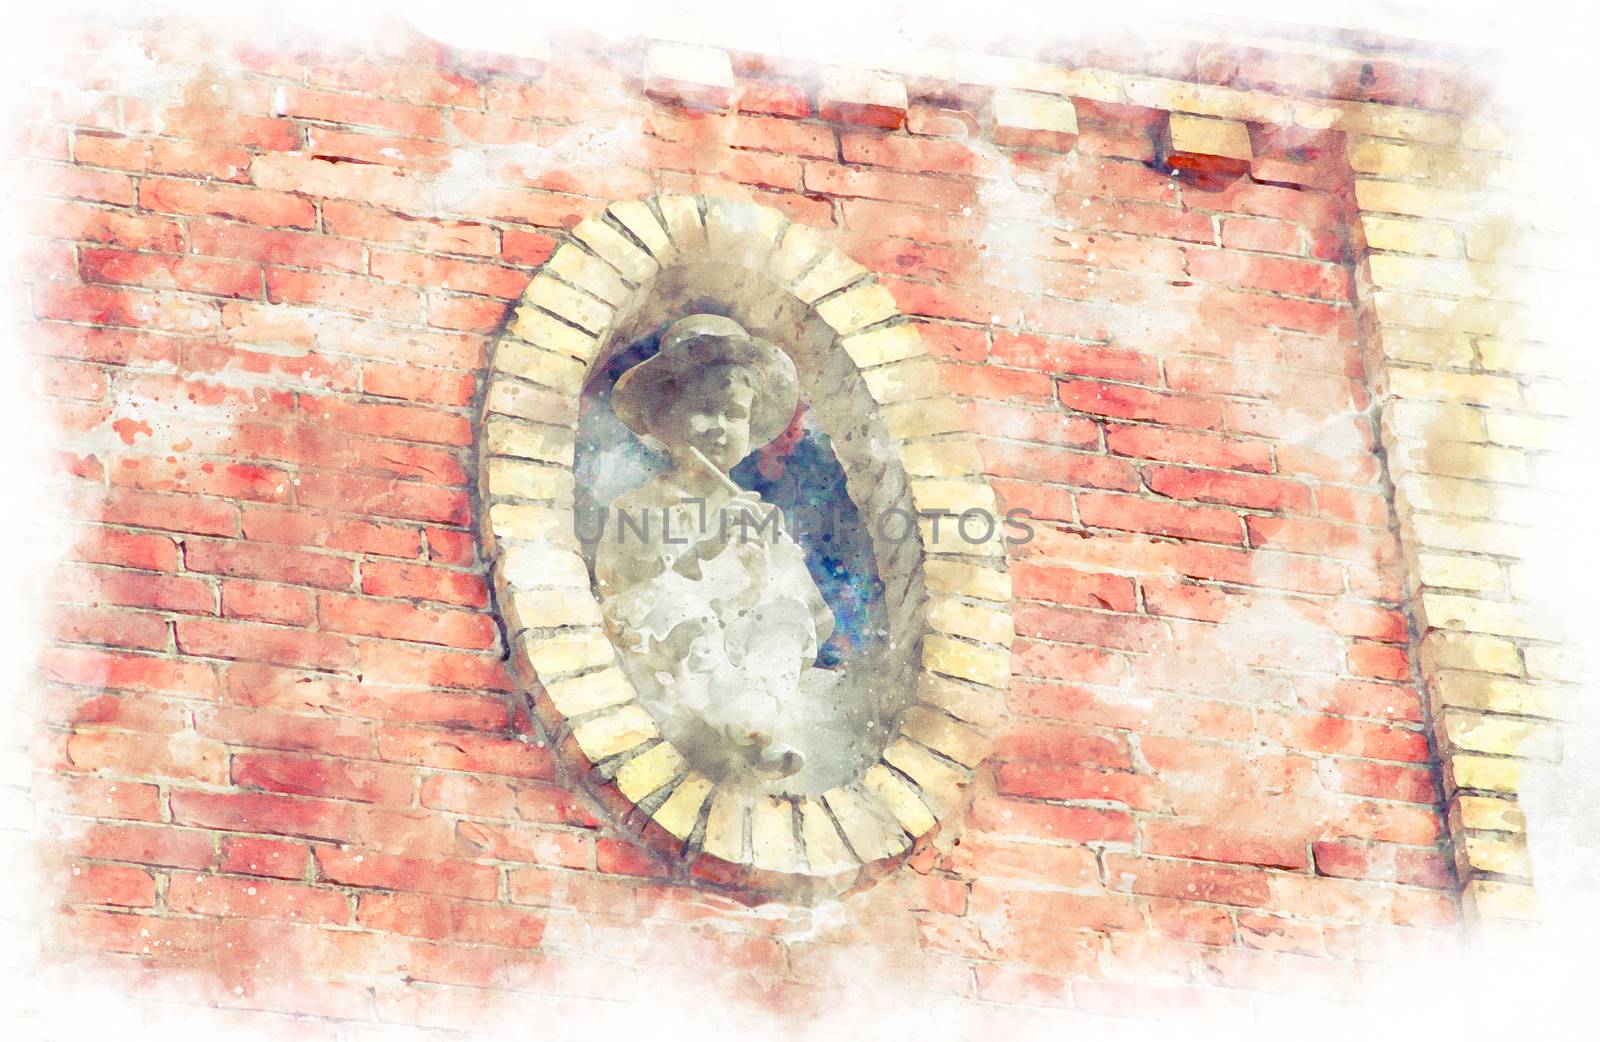 Digital illustration in watercolor style of a Statue of a boy with a pipe on the facade of an old building